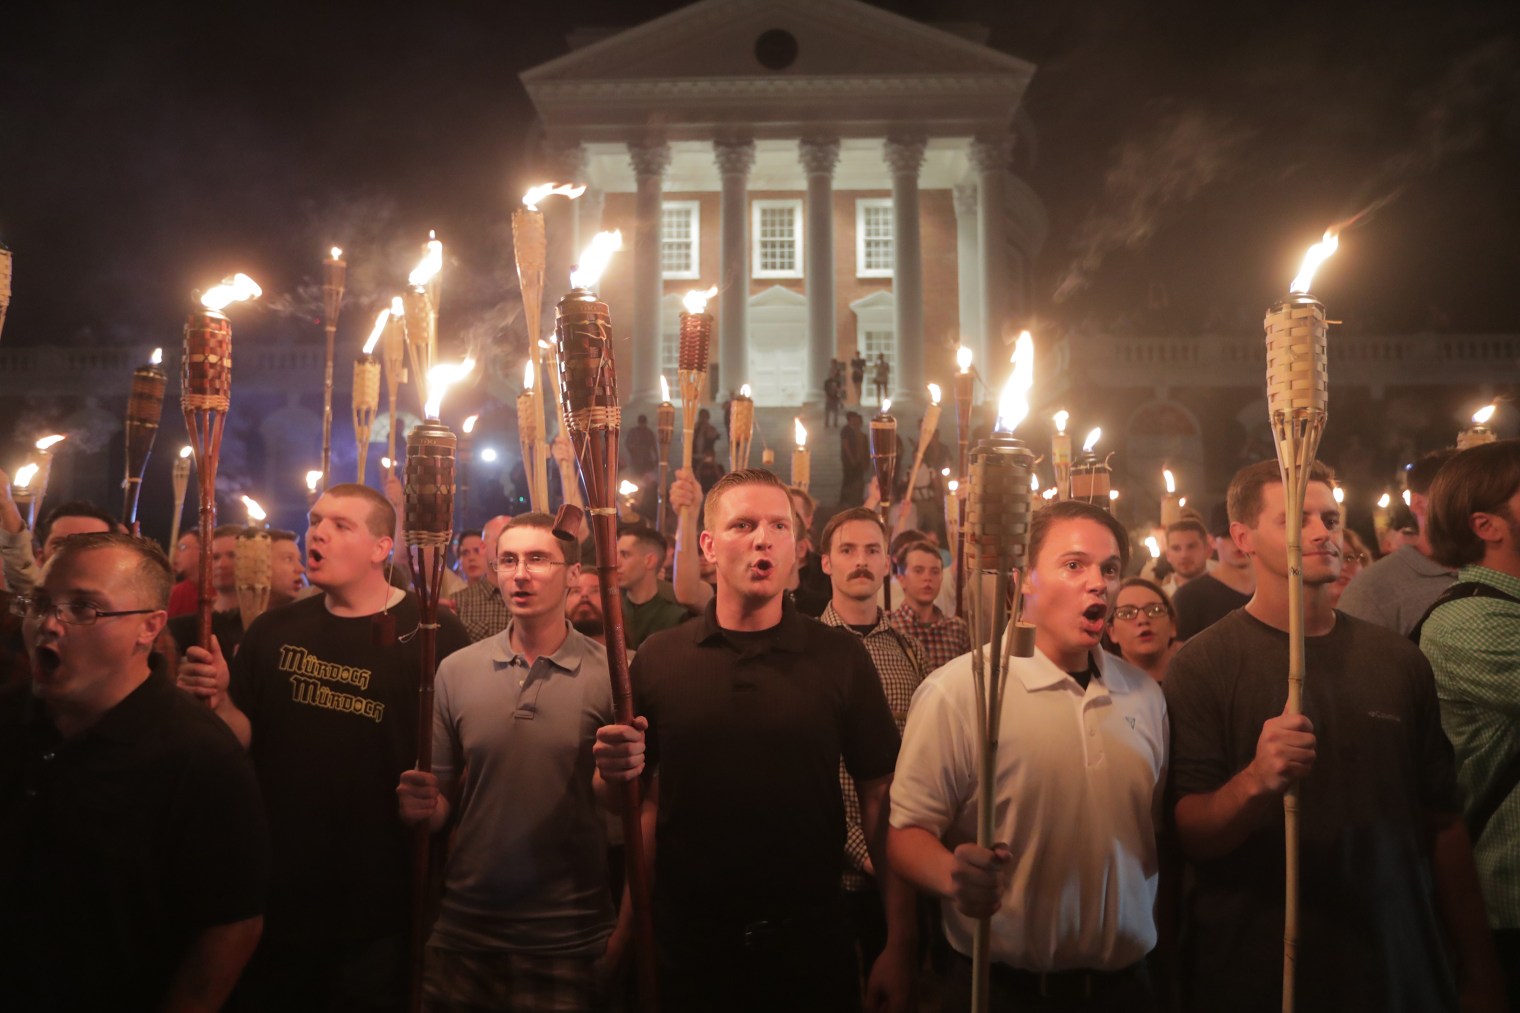 hite nationalists lead a torch march through the grounds of the University of Virginia campus in Charlottesville, Va., on Aug. 11, 2017.